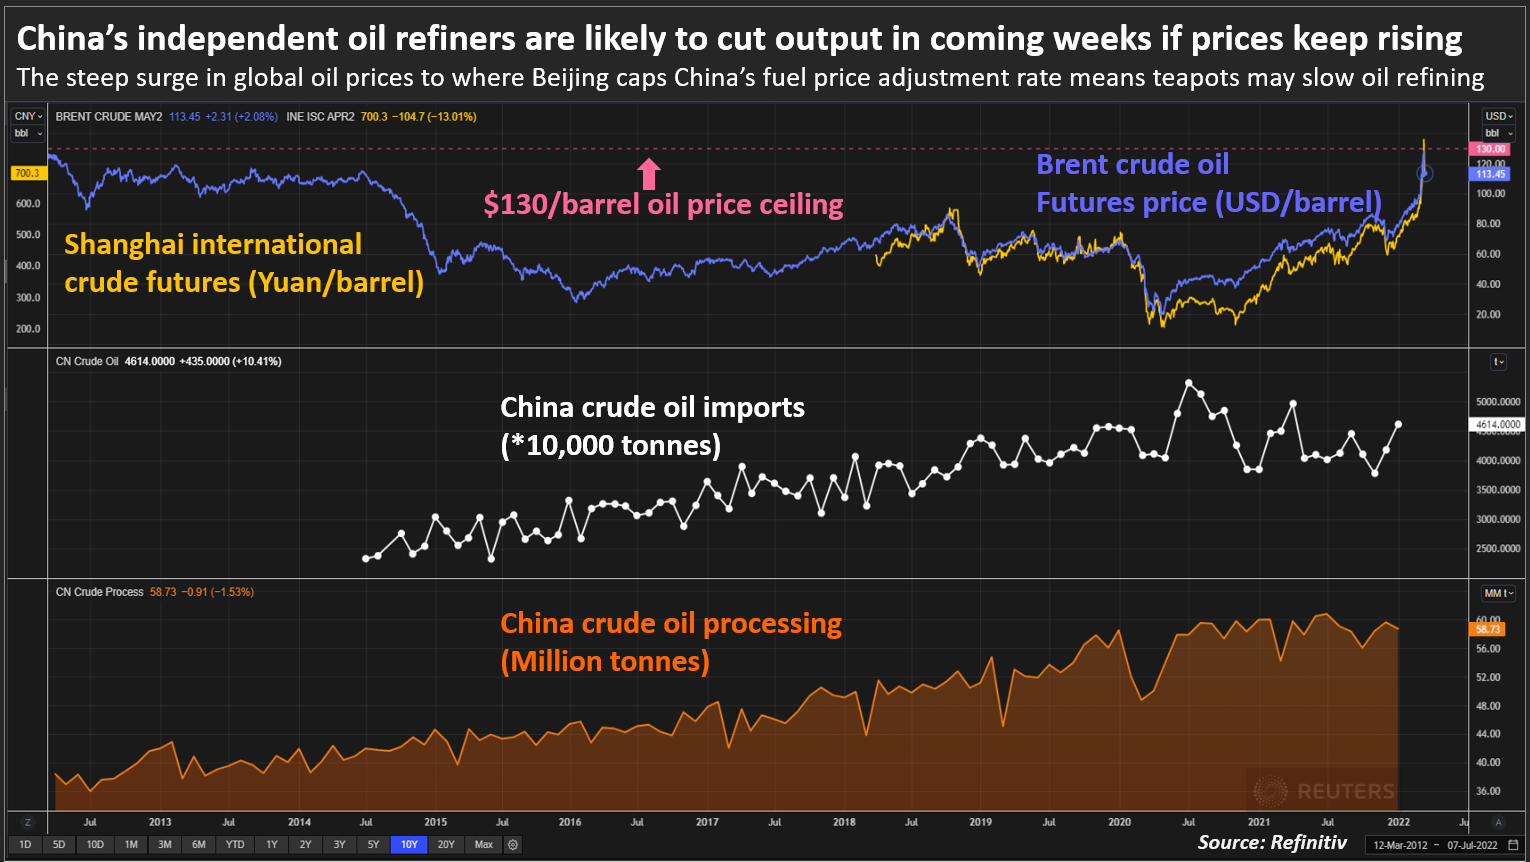 China’s independent oil refiners are likely to cut output in coming weeks if prices keep rising